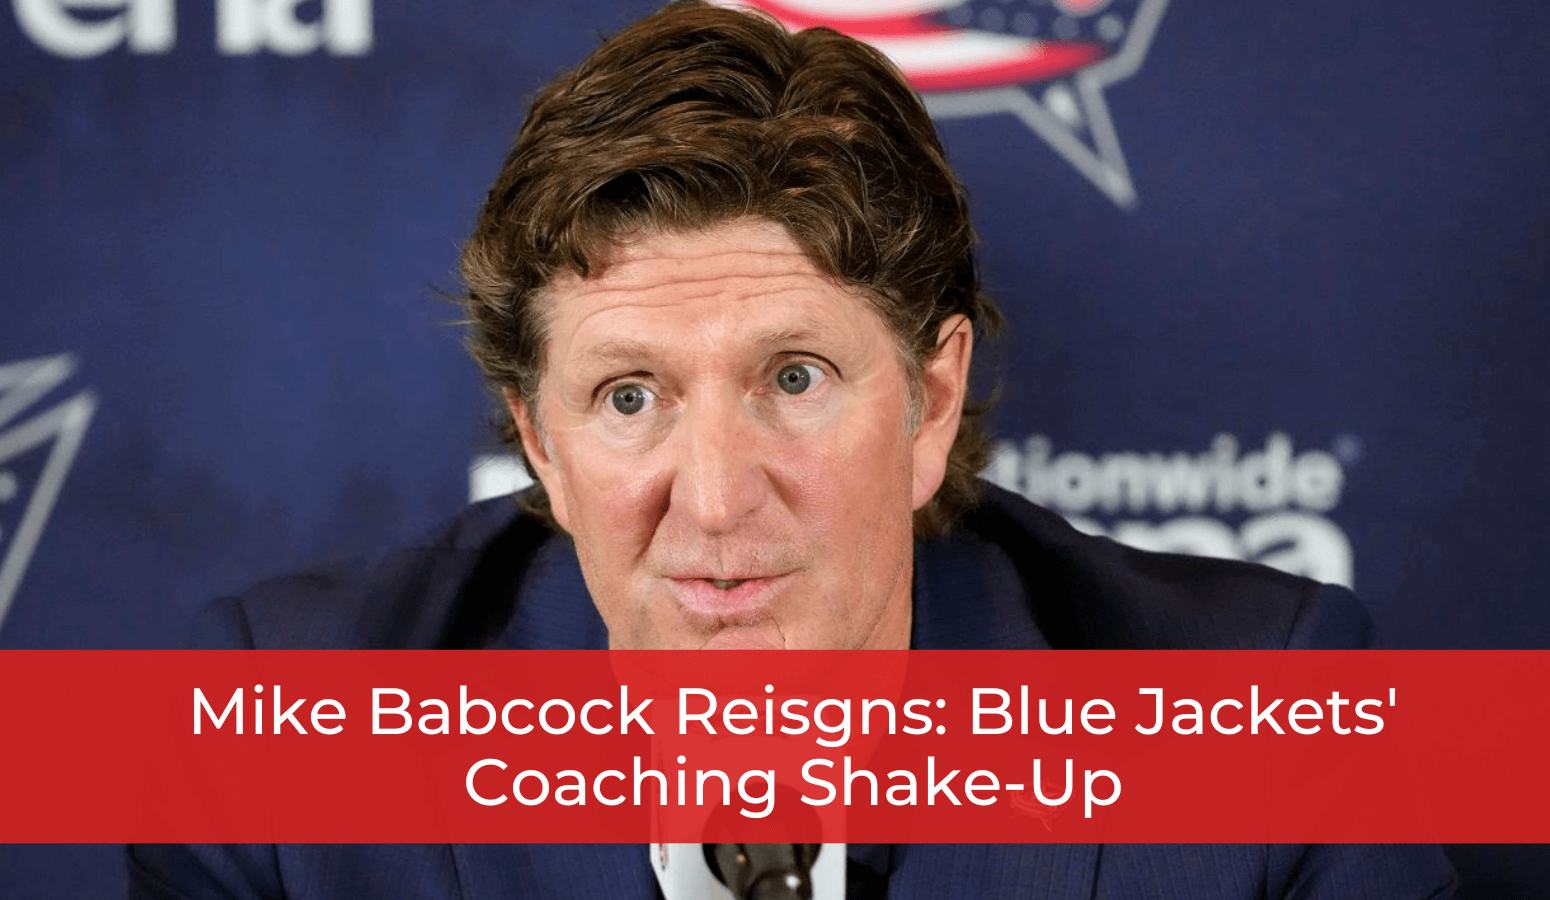 Featured image for “Mike Babcock Resigns: Blue Jackets’ Coaching Shake-Up”